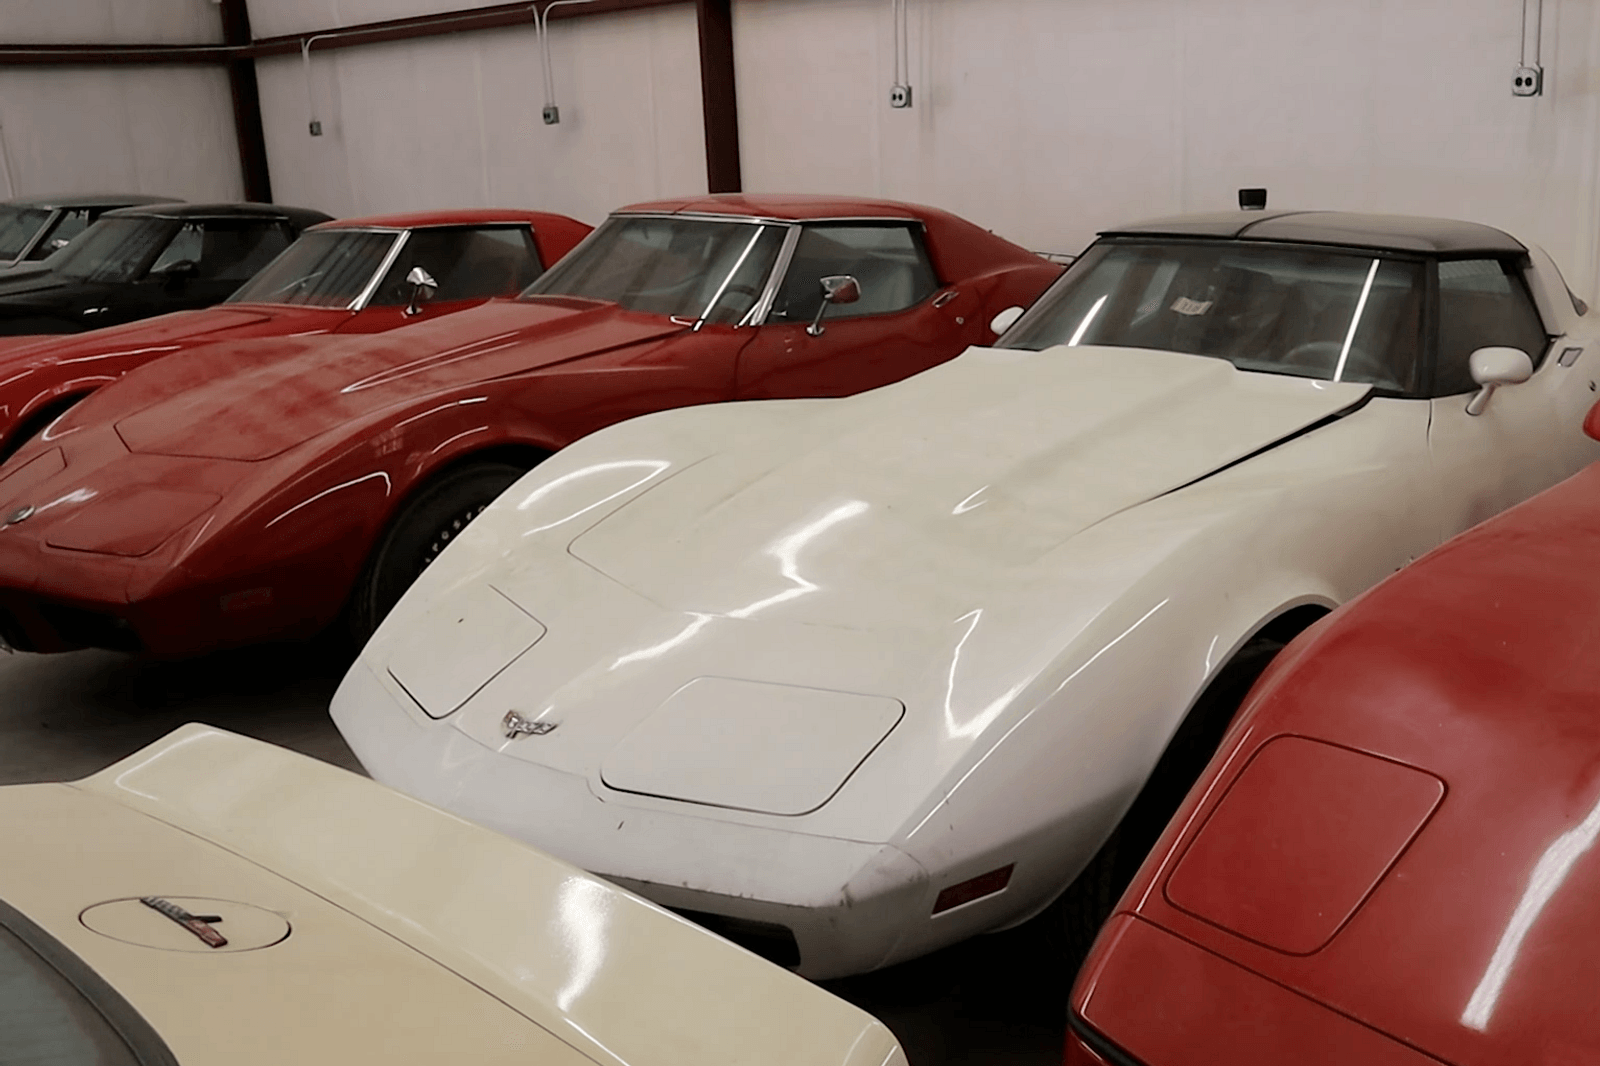 Watch: Spectacular 23-Car Barn Find Discovered In Alabama